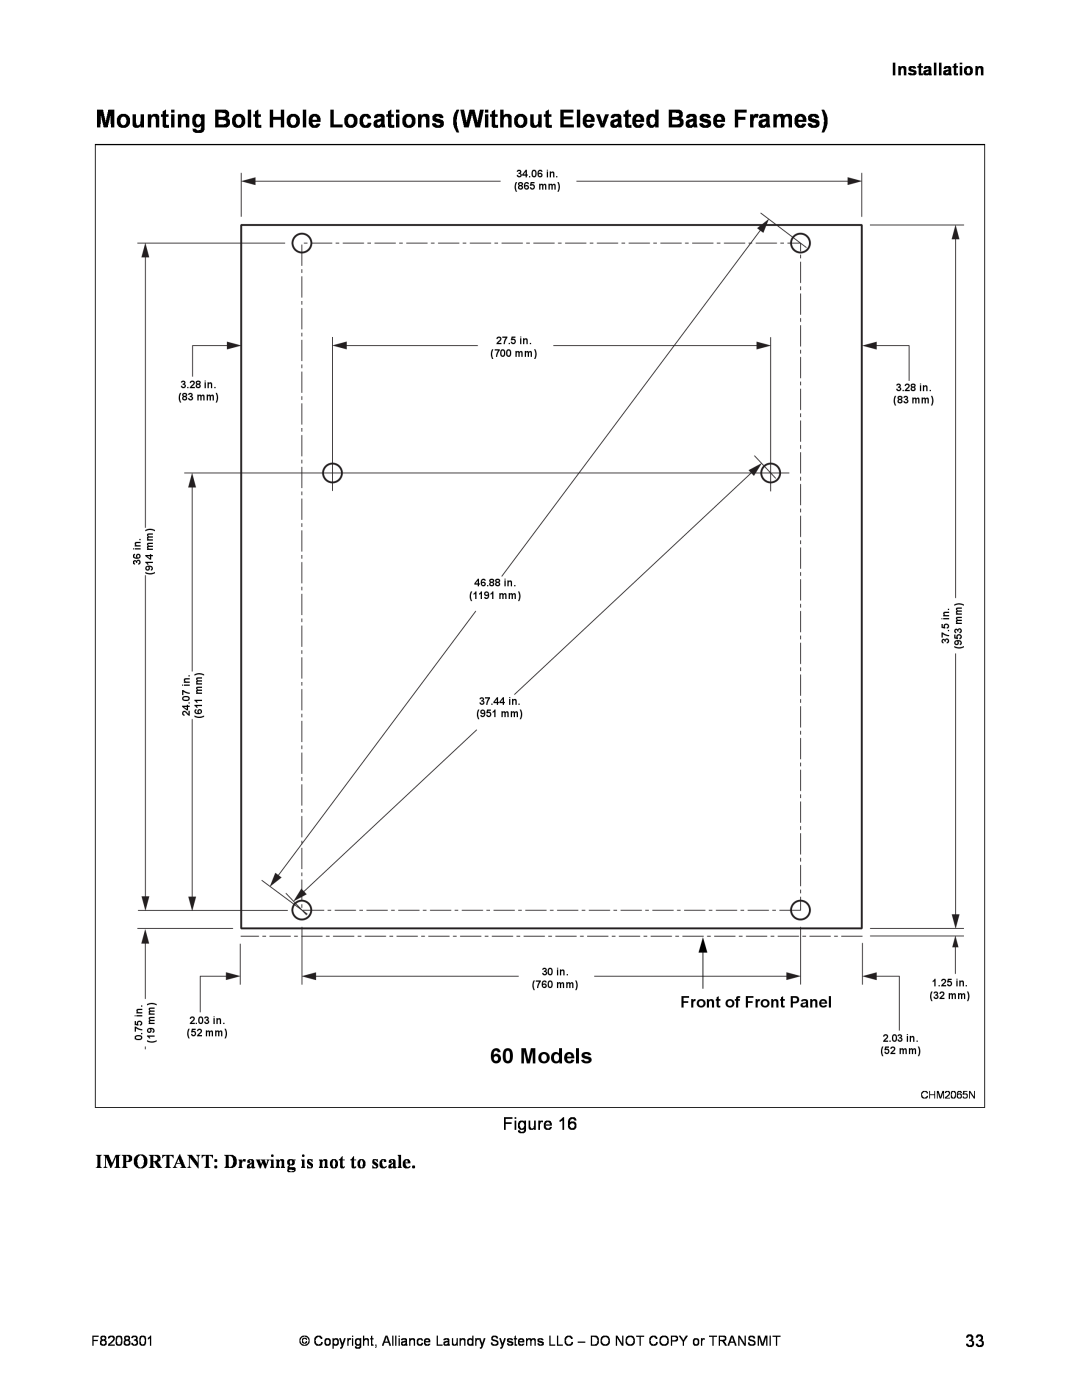 Alliance Laundry Systems CHM1772C manual Models, Mounting Bolt Hole Locations Without Elevated Base Frames, Installation 